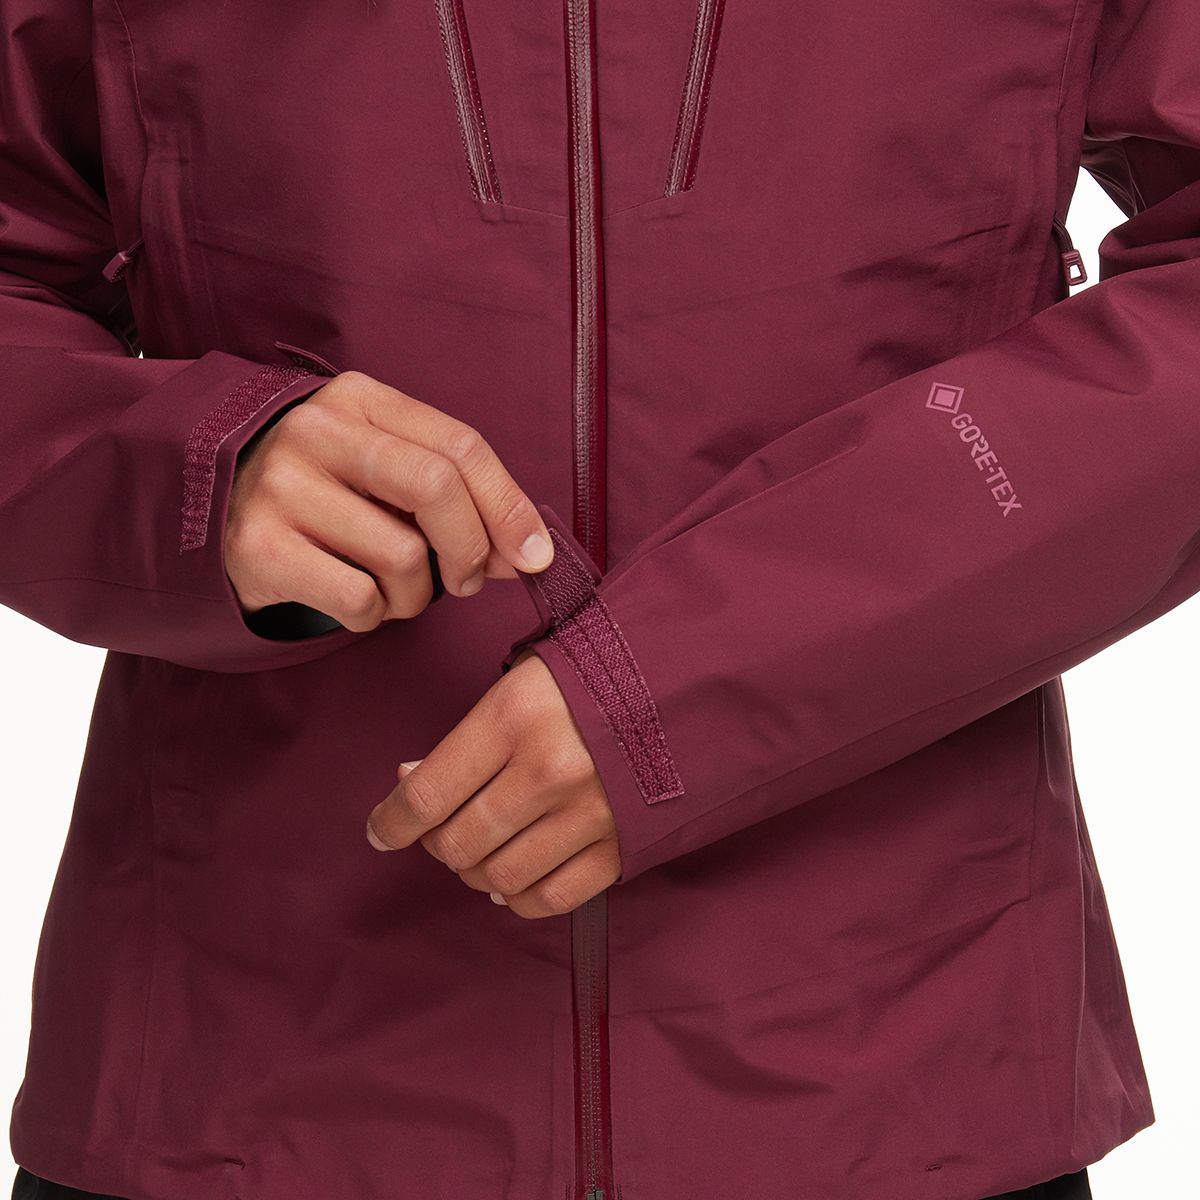 Patagonia - Women's Triolet Gore-Tex Shell Jacket (2 colors)